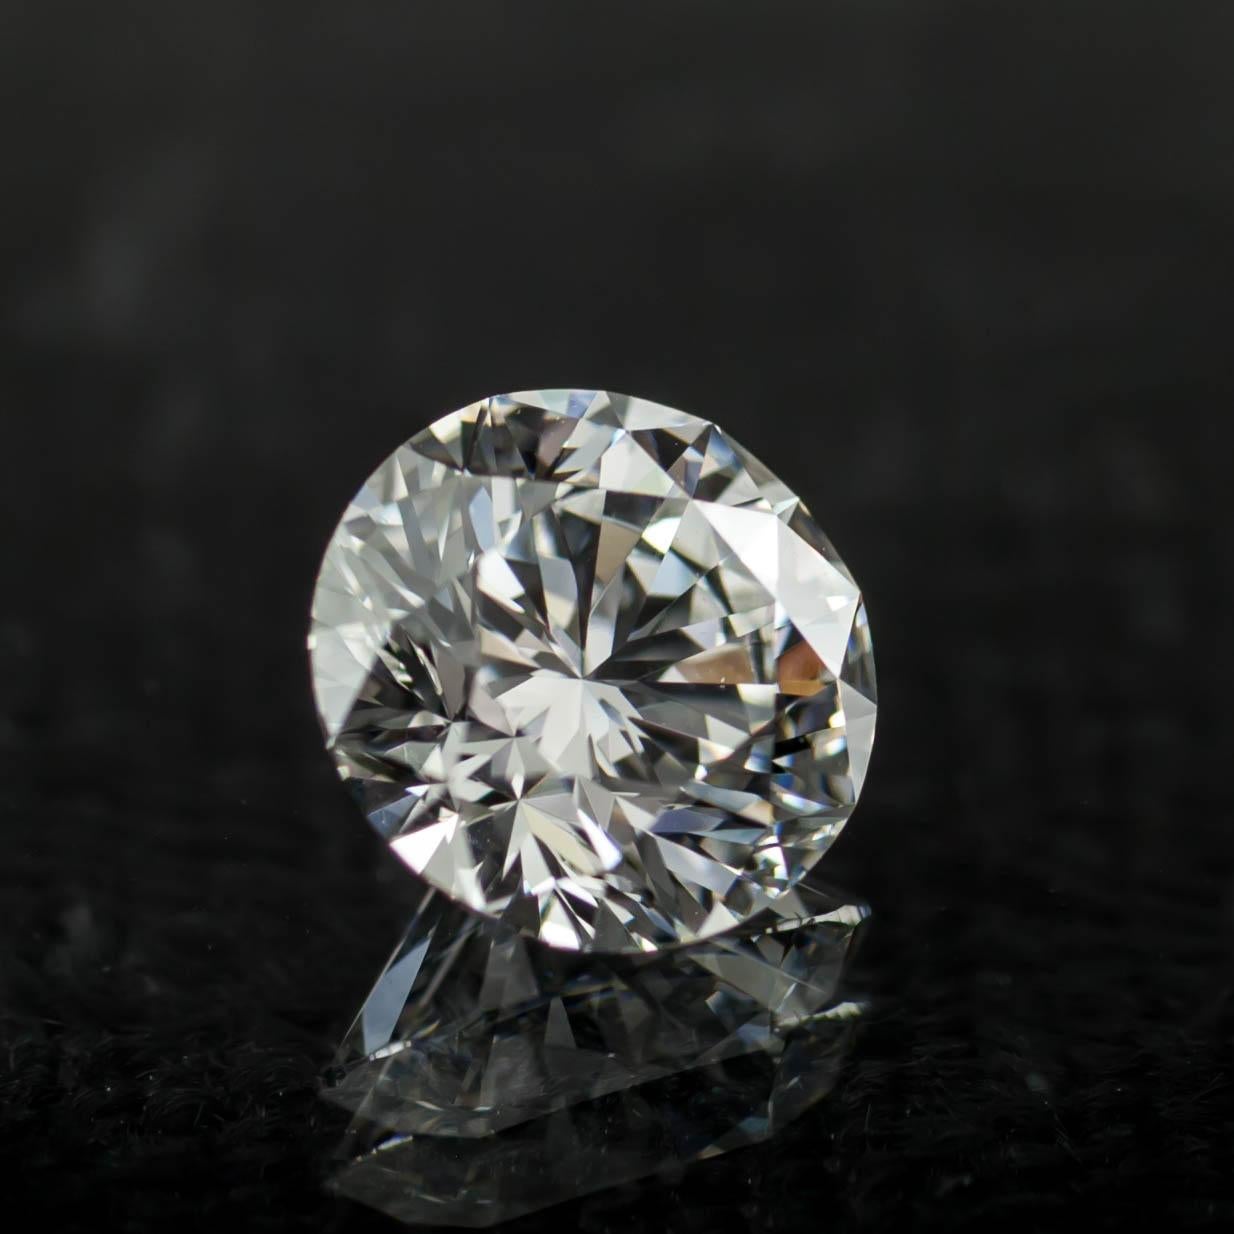 Diamond General Info
GIA Report Number: 5181451253
Diamond Cut: Round Brilliant 
Measurements:7.44 - 7.49 x 4.66 mm

Diamond Grading Results
Carat Weight: 1.58
Color Grade: D
Clarity Grade: VS1

Additional Grading Information 
Polish: Very Good
Cut: